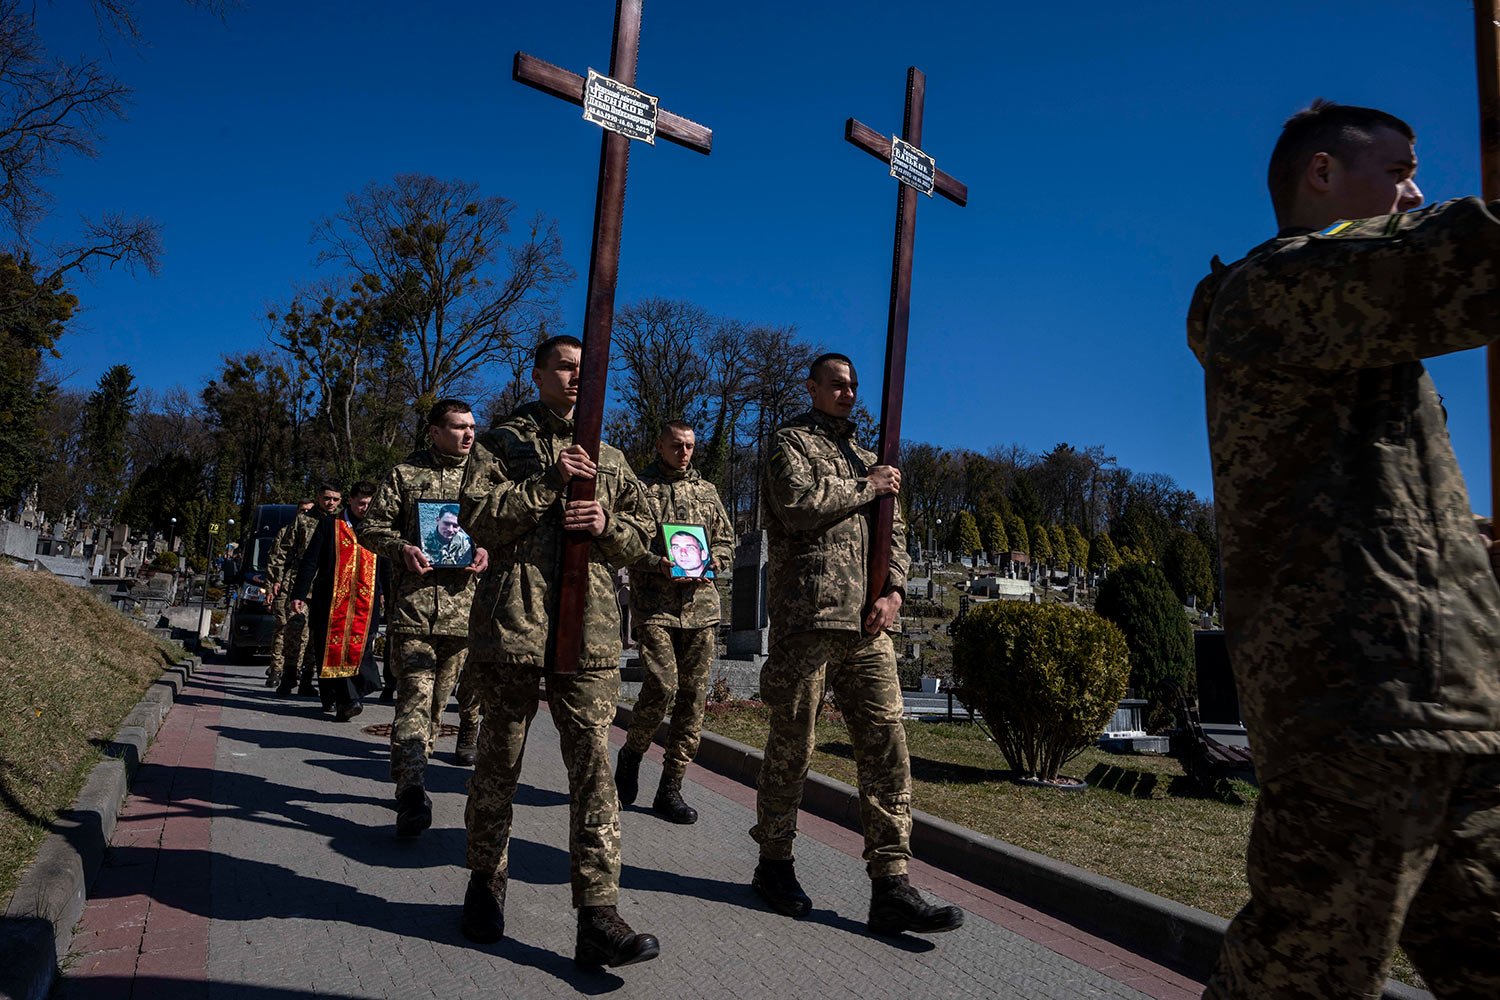  Ukrainian soldiers prepare to bury 32-year-old Senior Lieutenant Pavlo Chernikov, in the photograph at left, and 47-year-old soldier Roman Valkov, during their funeral ceremony, after being killed in action, at the Lychakiv cemetery, in Lviv, wester